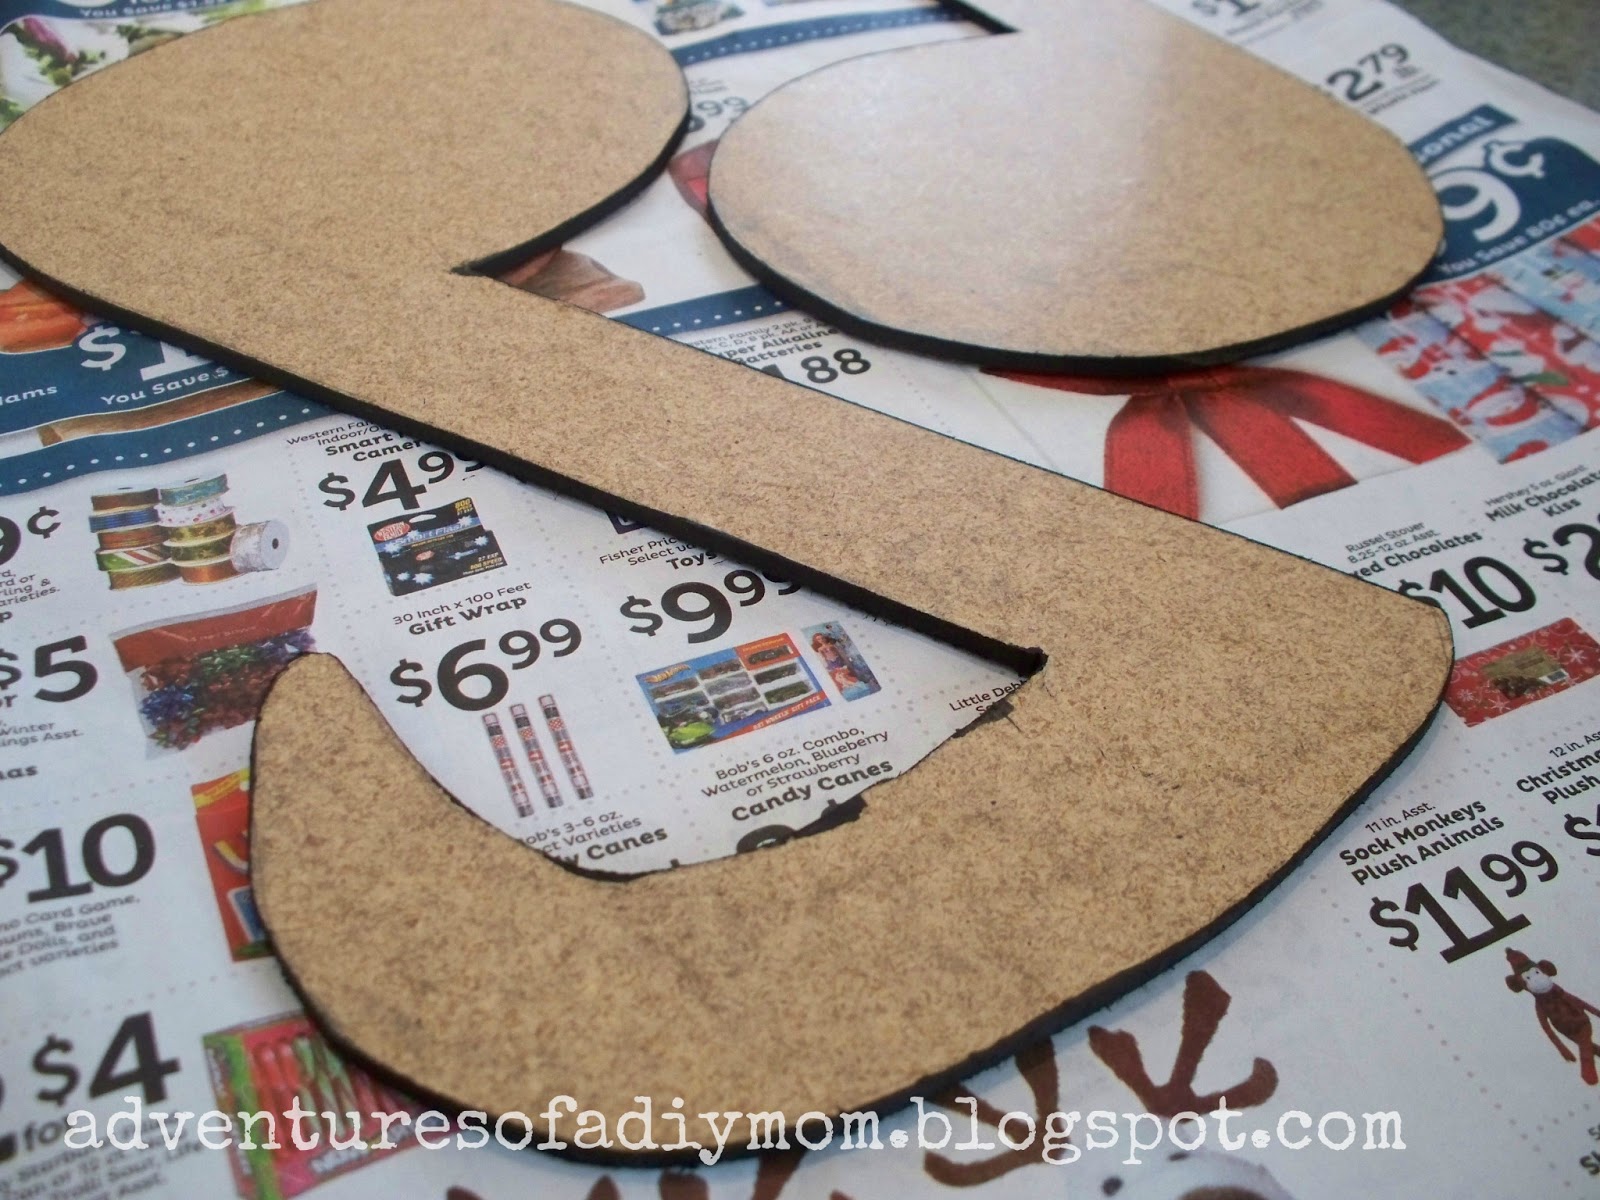 Mod Podge Wooden Music Notes Decor - Adventures of a DIY Mom